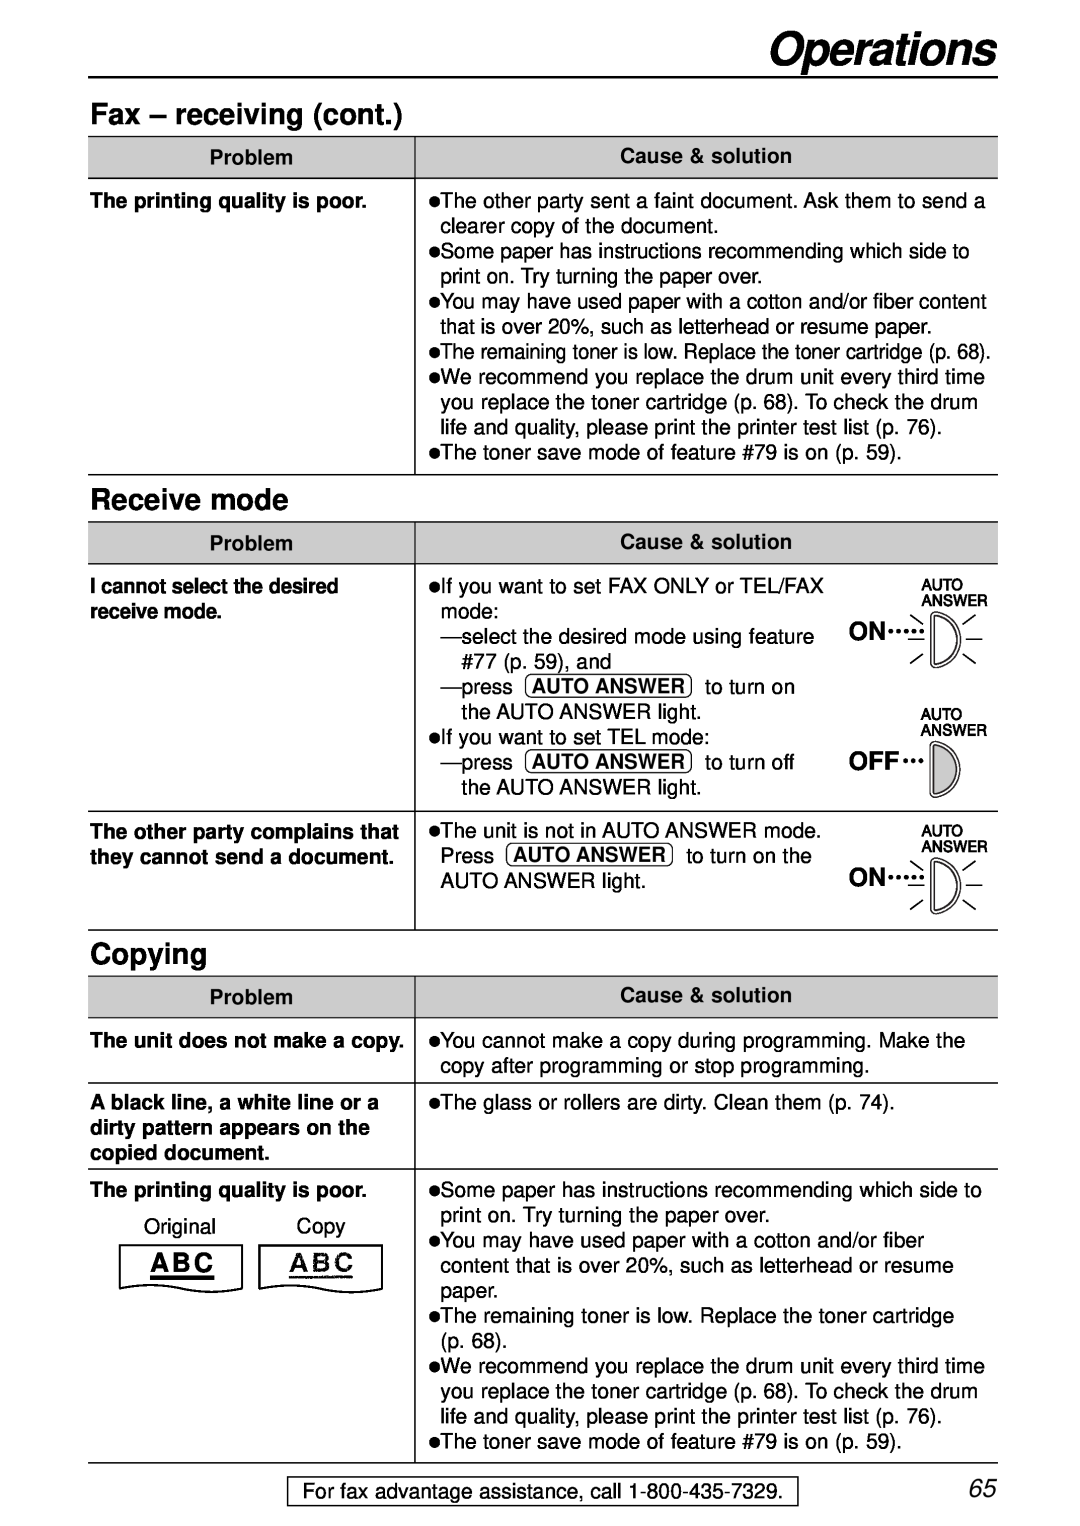 Panasonic KX-FL501 manual Fax - receiving cont, Receive mode, Copying, Operations, Problem, Cause & solution, receive mode 